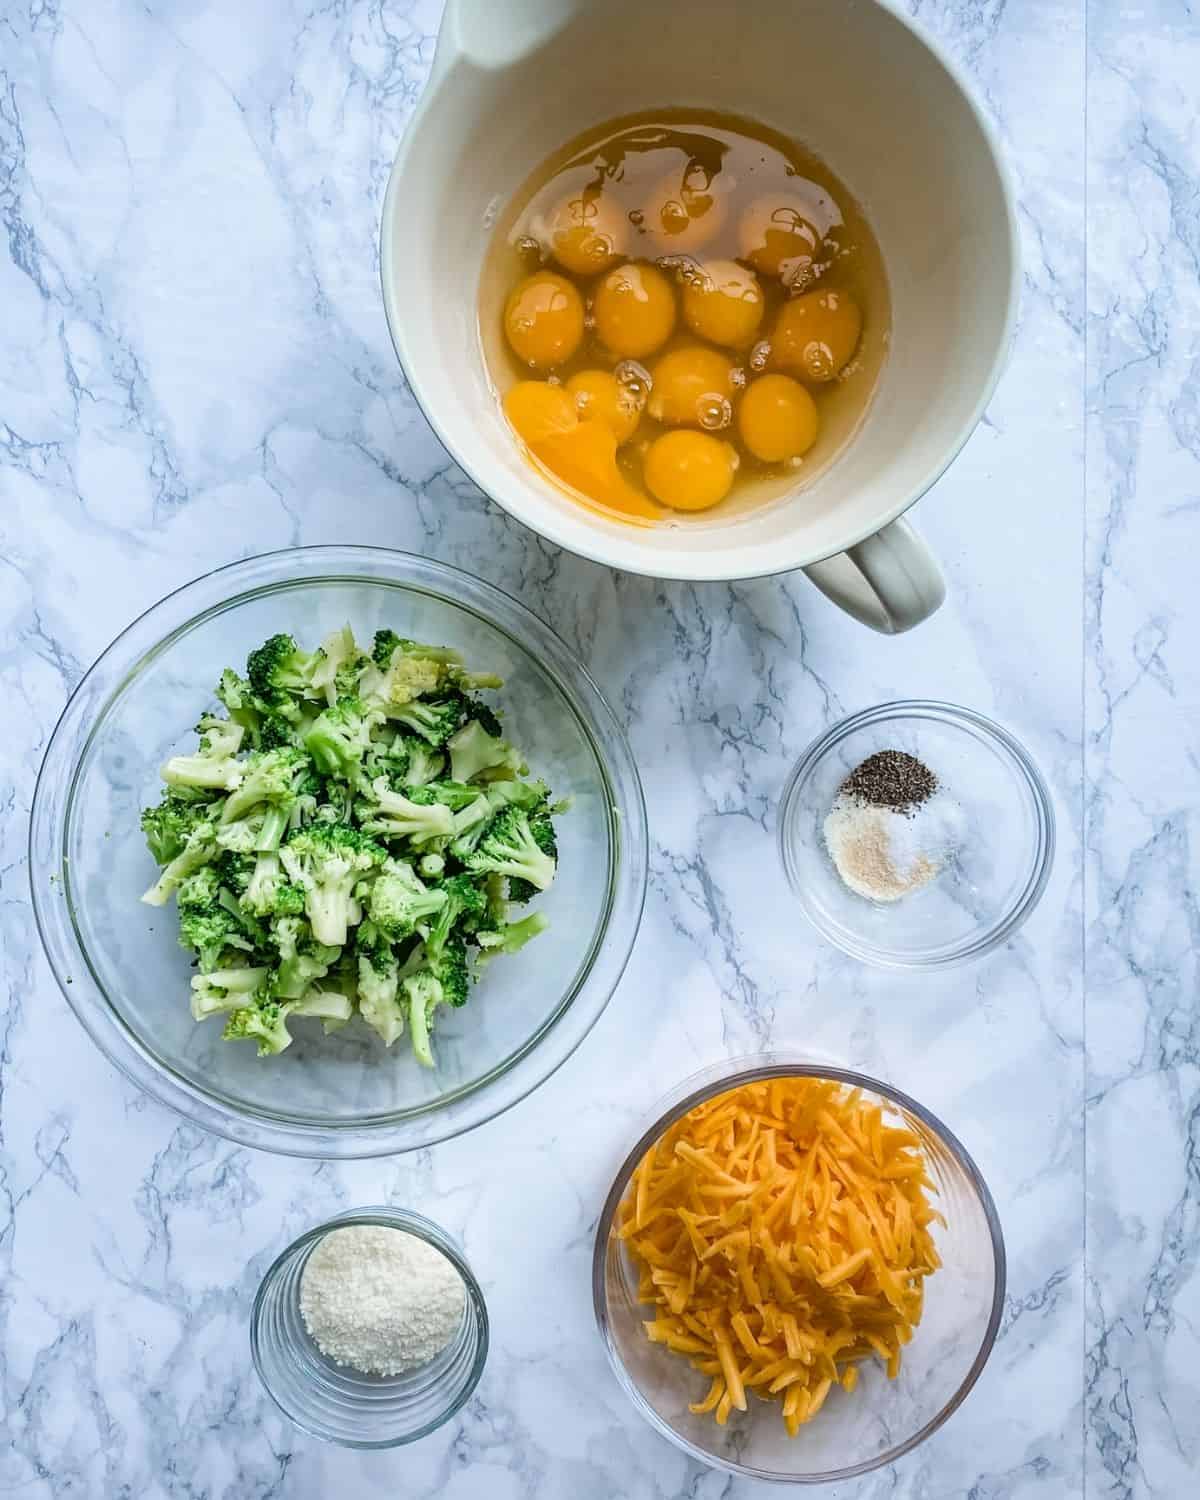 ingredients to make a broccoli egg baked with cheddar cheese.